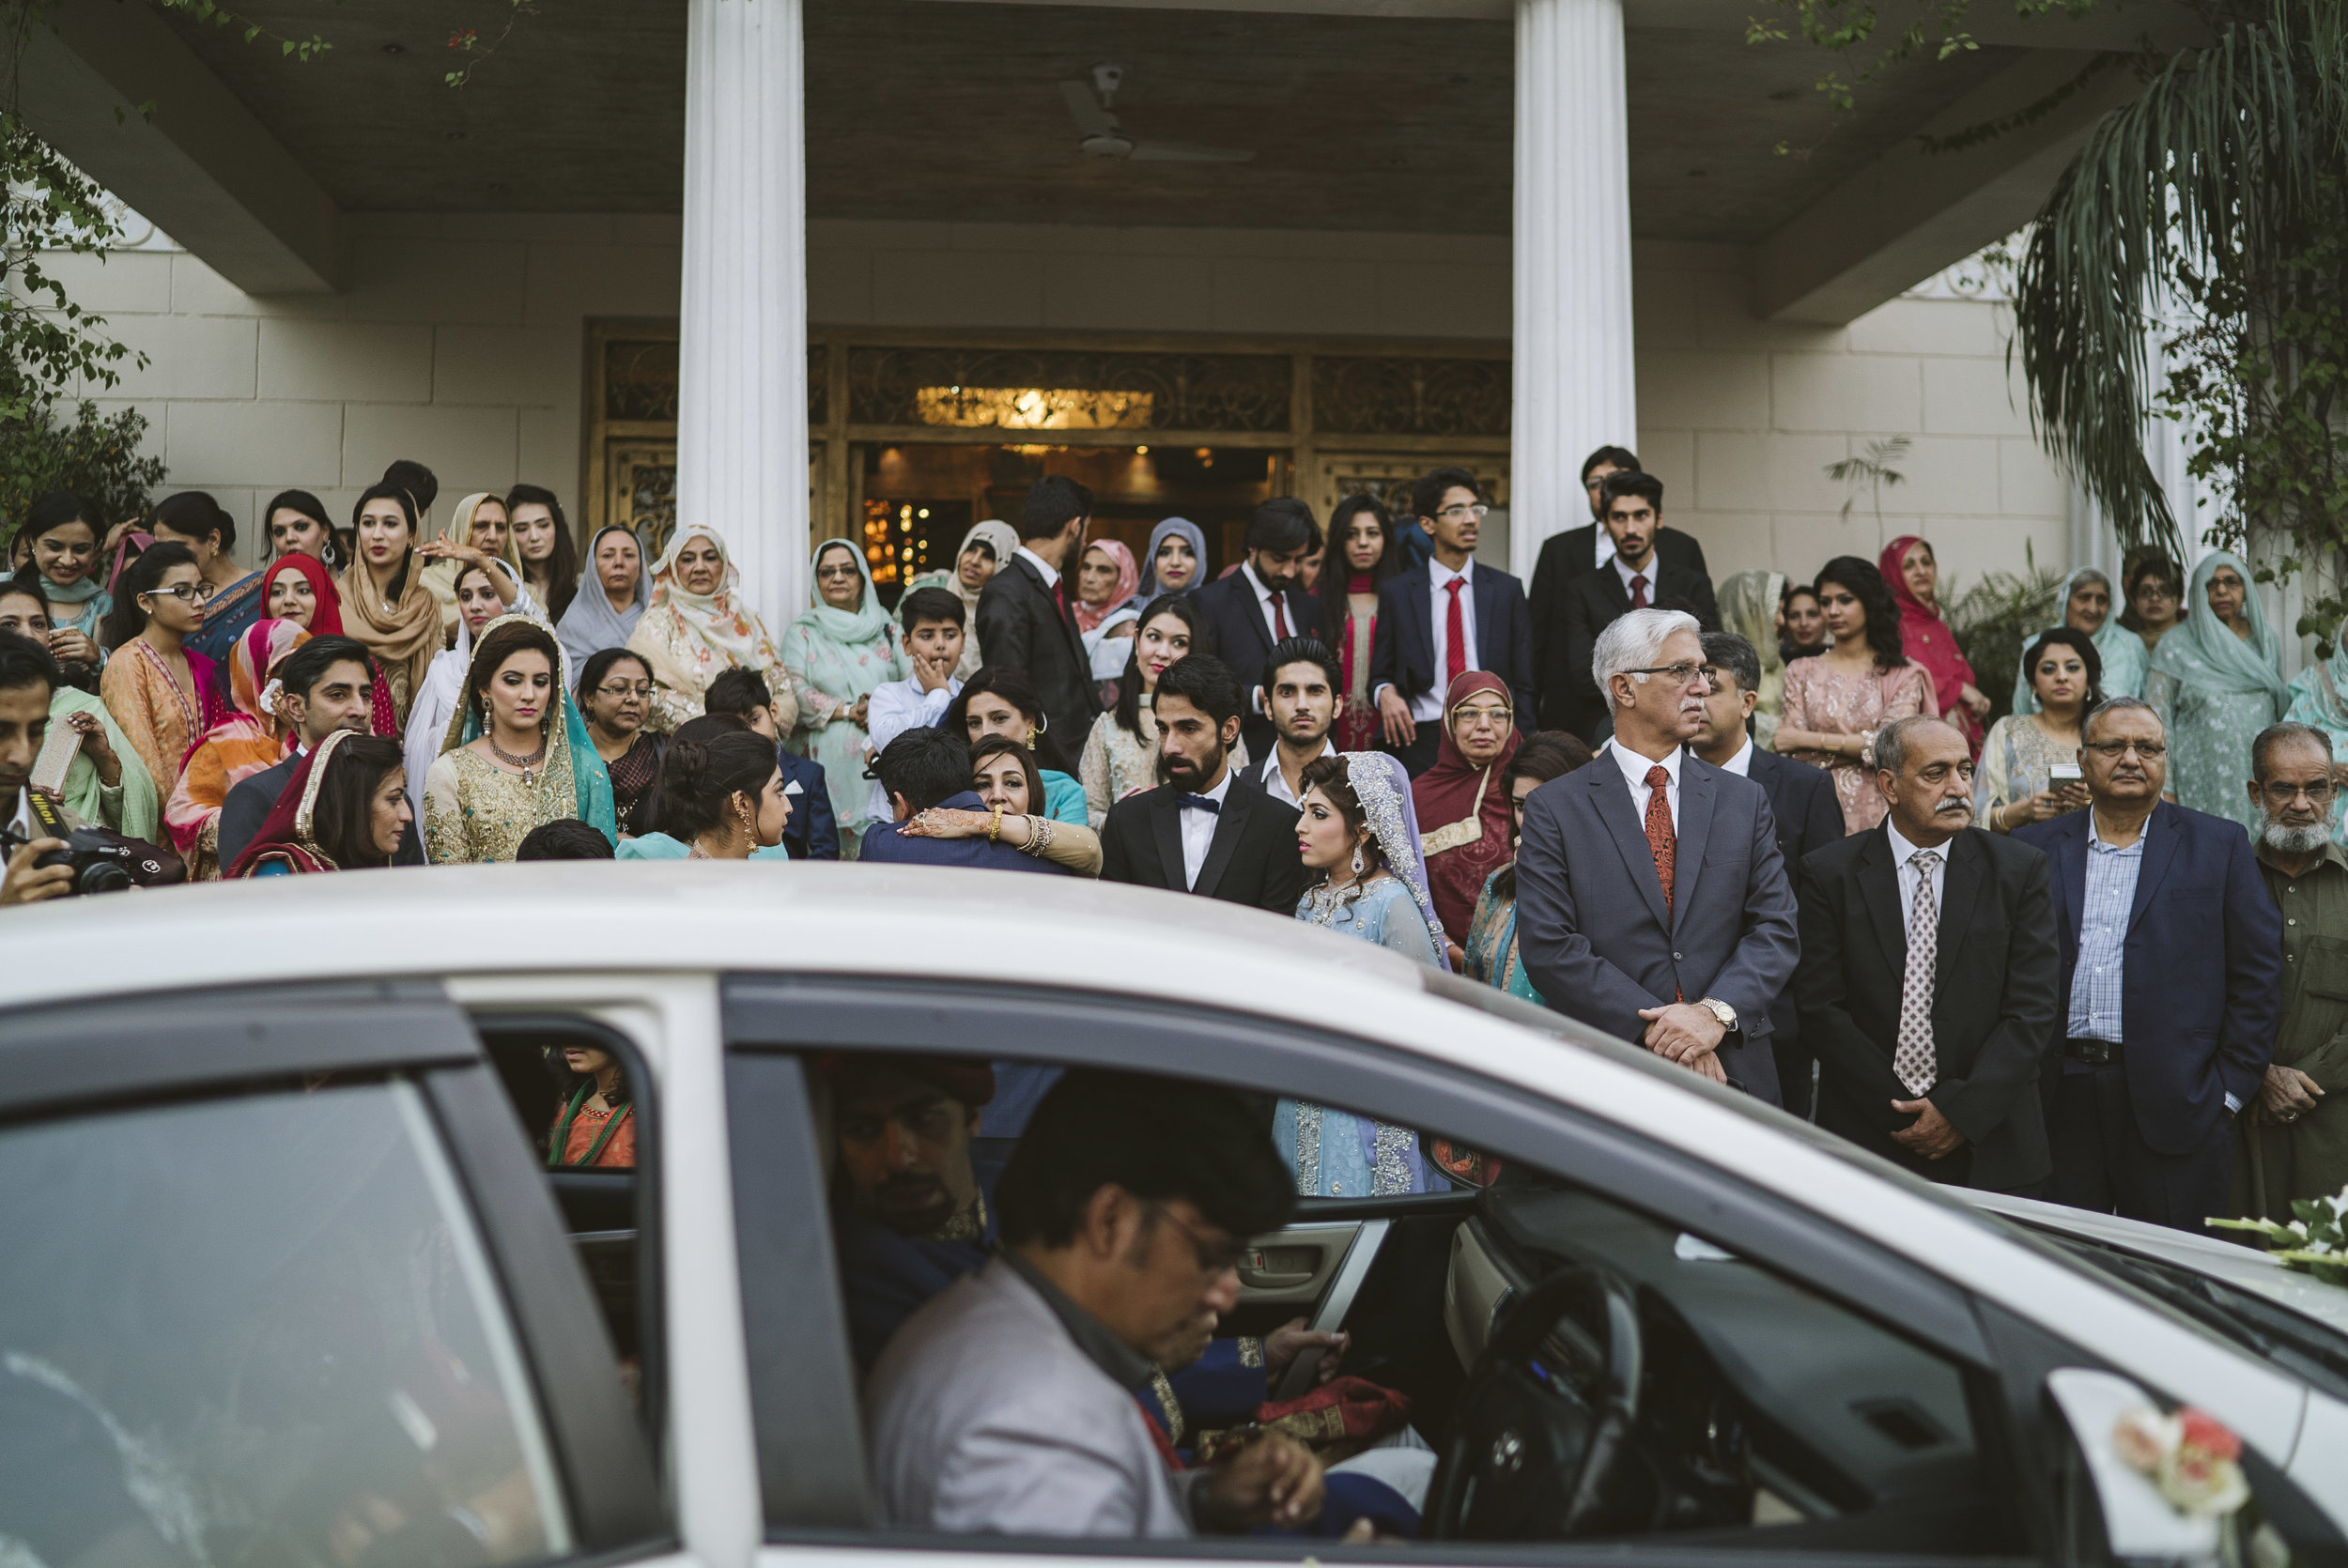  Kashif Malik hugs his new mother-in-law before departing with his new wife, Sadaf, to his family's home on the day of their  baraat . The departing of the bride is usually a somber affair, and Sadaf's family watches on in silence as she and her husb